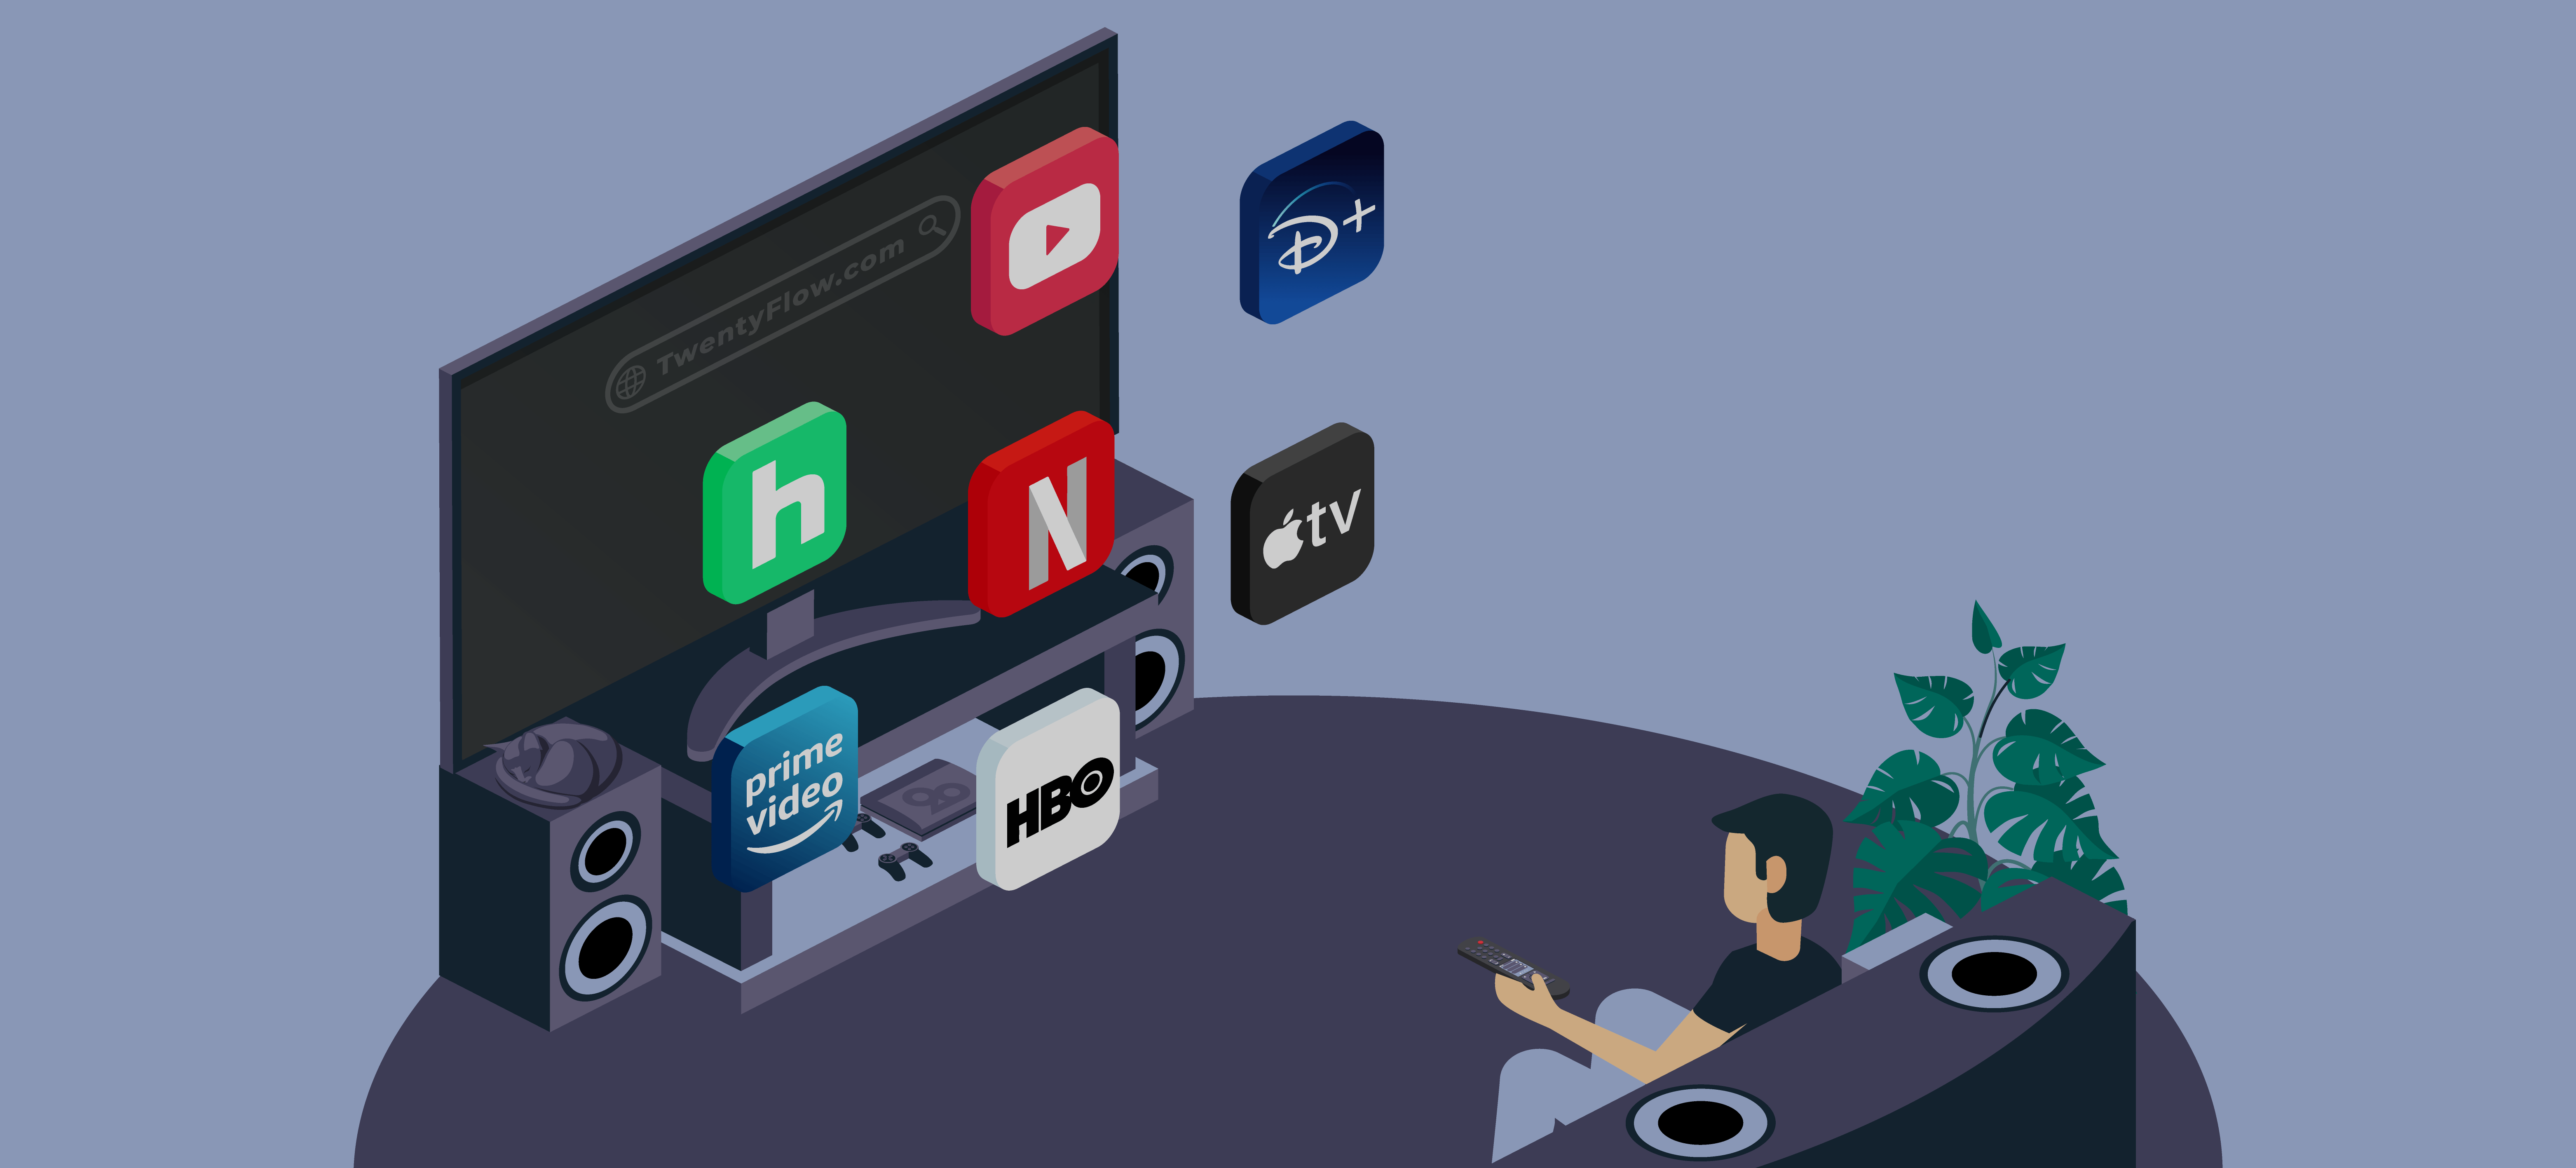 Why are new Streaming services suddenly popping up? TwentyFlow